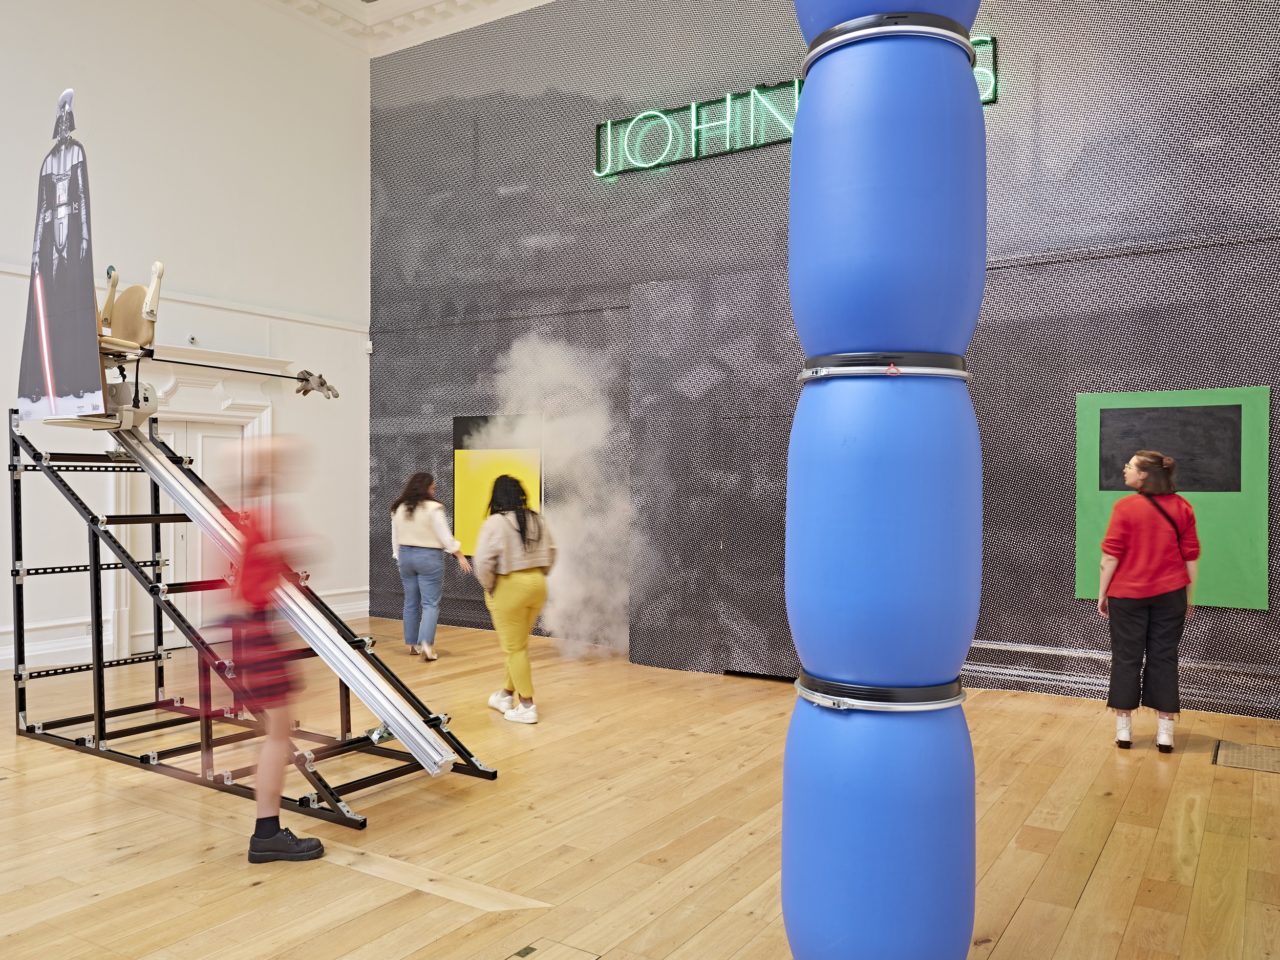 An image of multiple installations in a large gallery space. Blue barrels are stacks in front on top of each other, a cut-out of Darth Vader can be seen on top of an incline structure, a green painting hung up on the wall, a large greyscale wallpaper hung on the wall with a neon green light labelled 'JOHNNY'S' positioned at the top of the wall. There are also several figures walking around the gallery area.